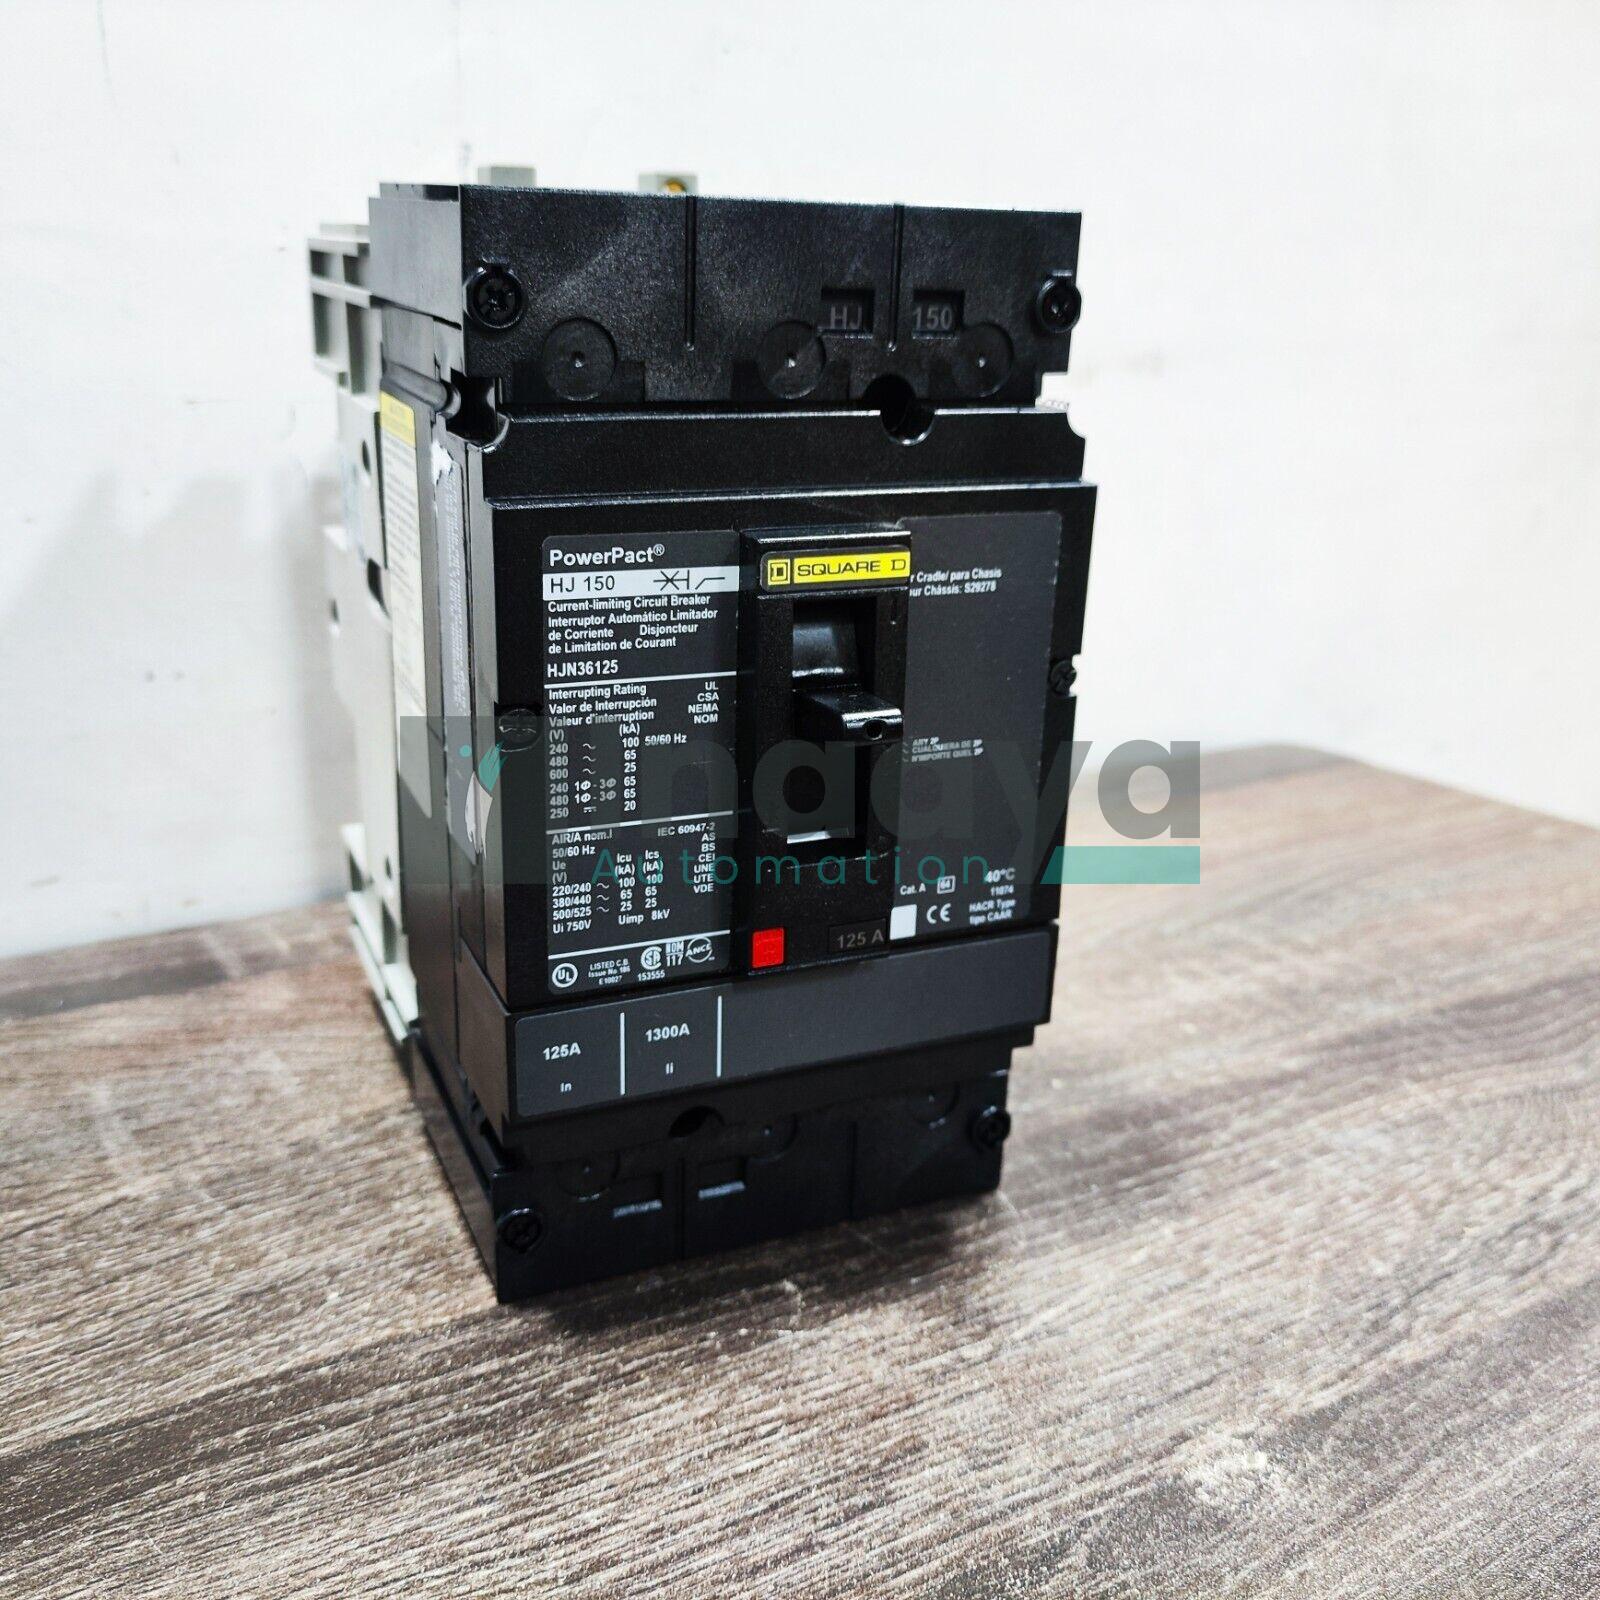 SQUARE D POWERPACT HJ150 HJN36125 150A CIRCUIT BREAKER